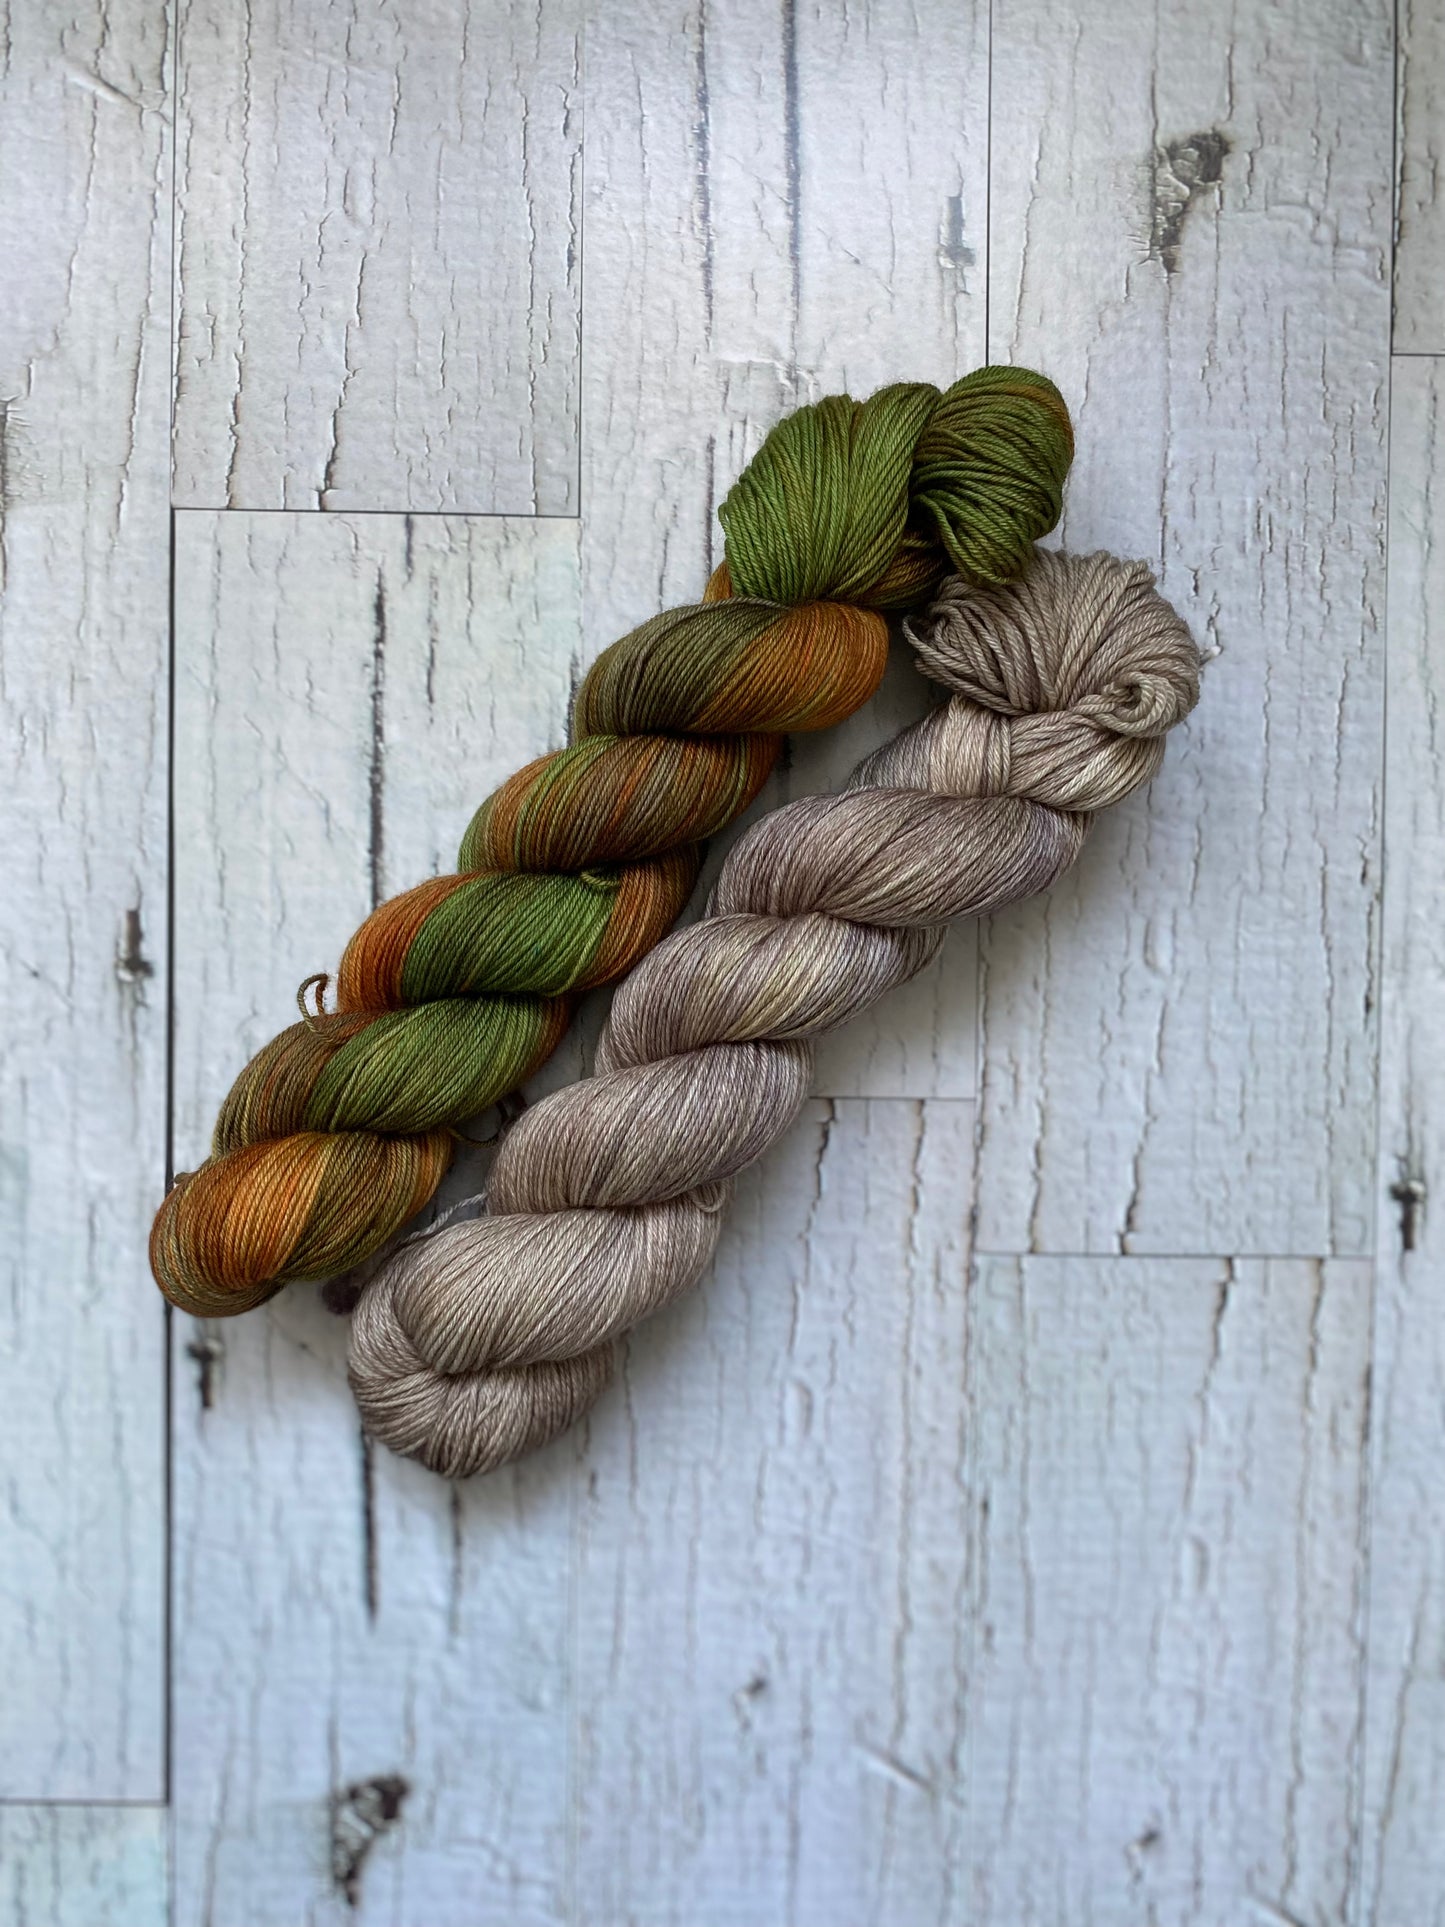 Two Skeins of Everyday Fingeringing, Fallen Leaves on the left and Nut Brown Hare on the Right.  